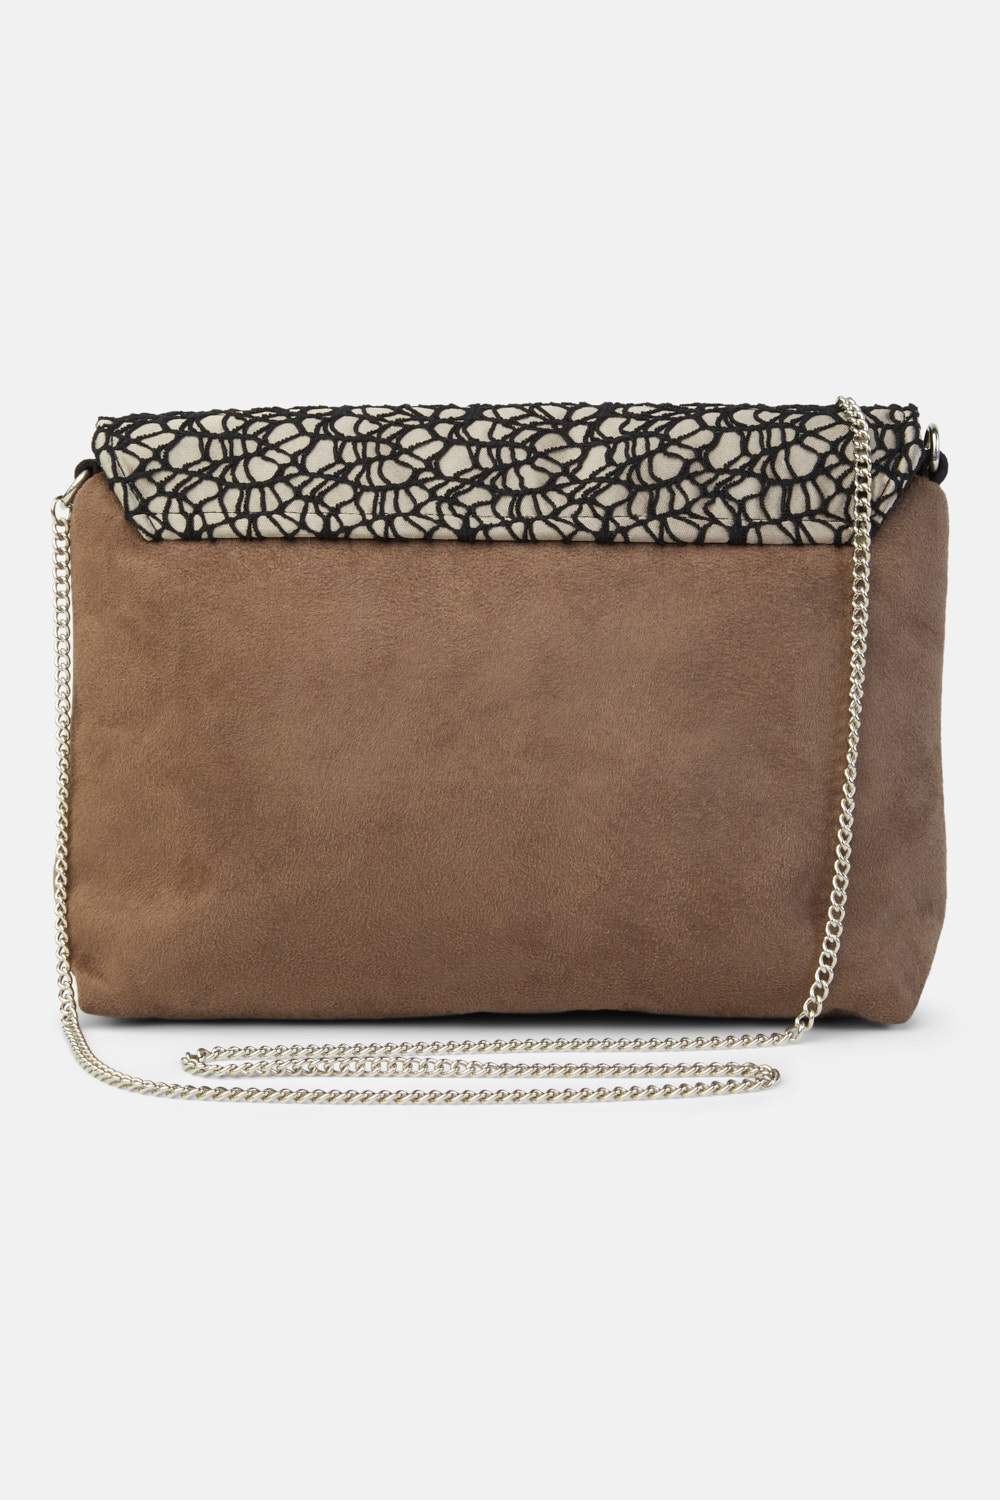 Marina Milani BAGS Castano Chocolate Brown Suede And Macramé Silver Chain Shoulder Bag